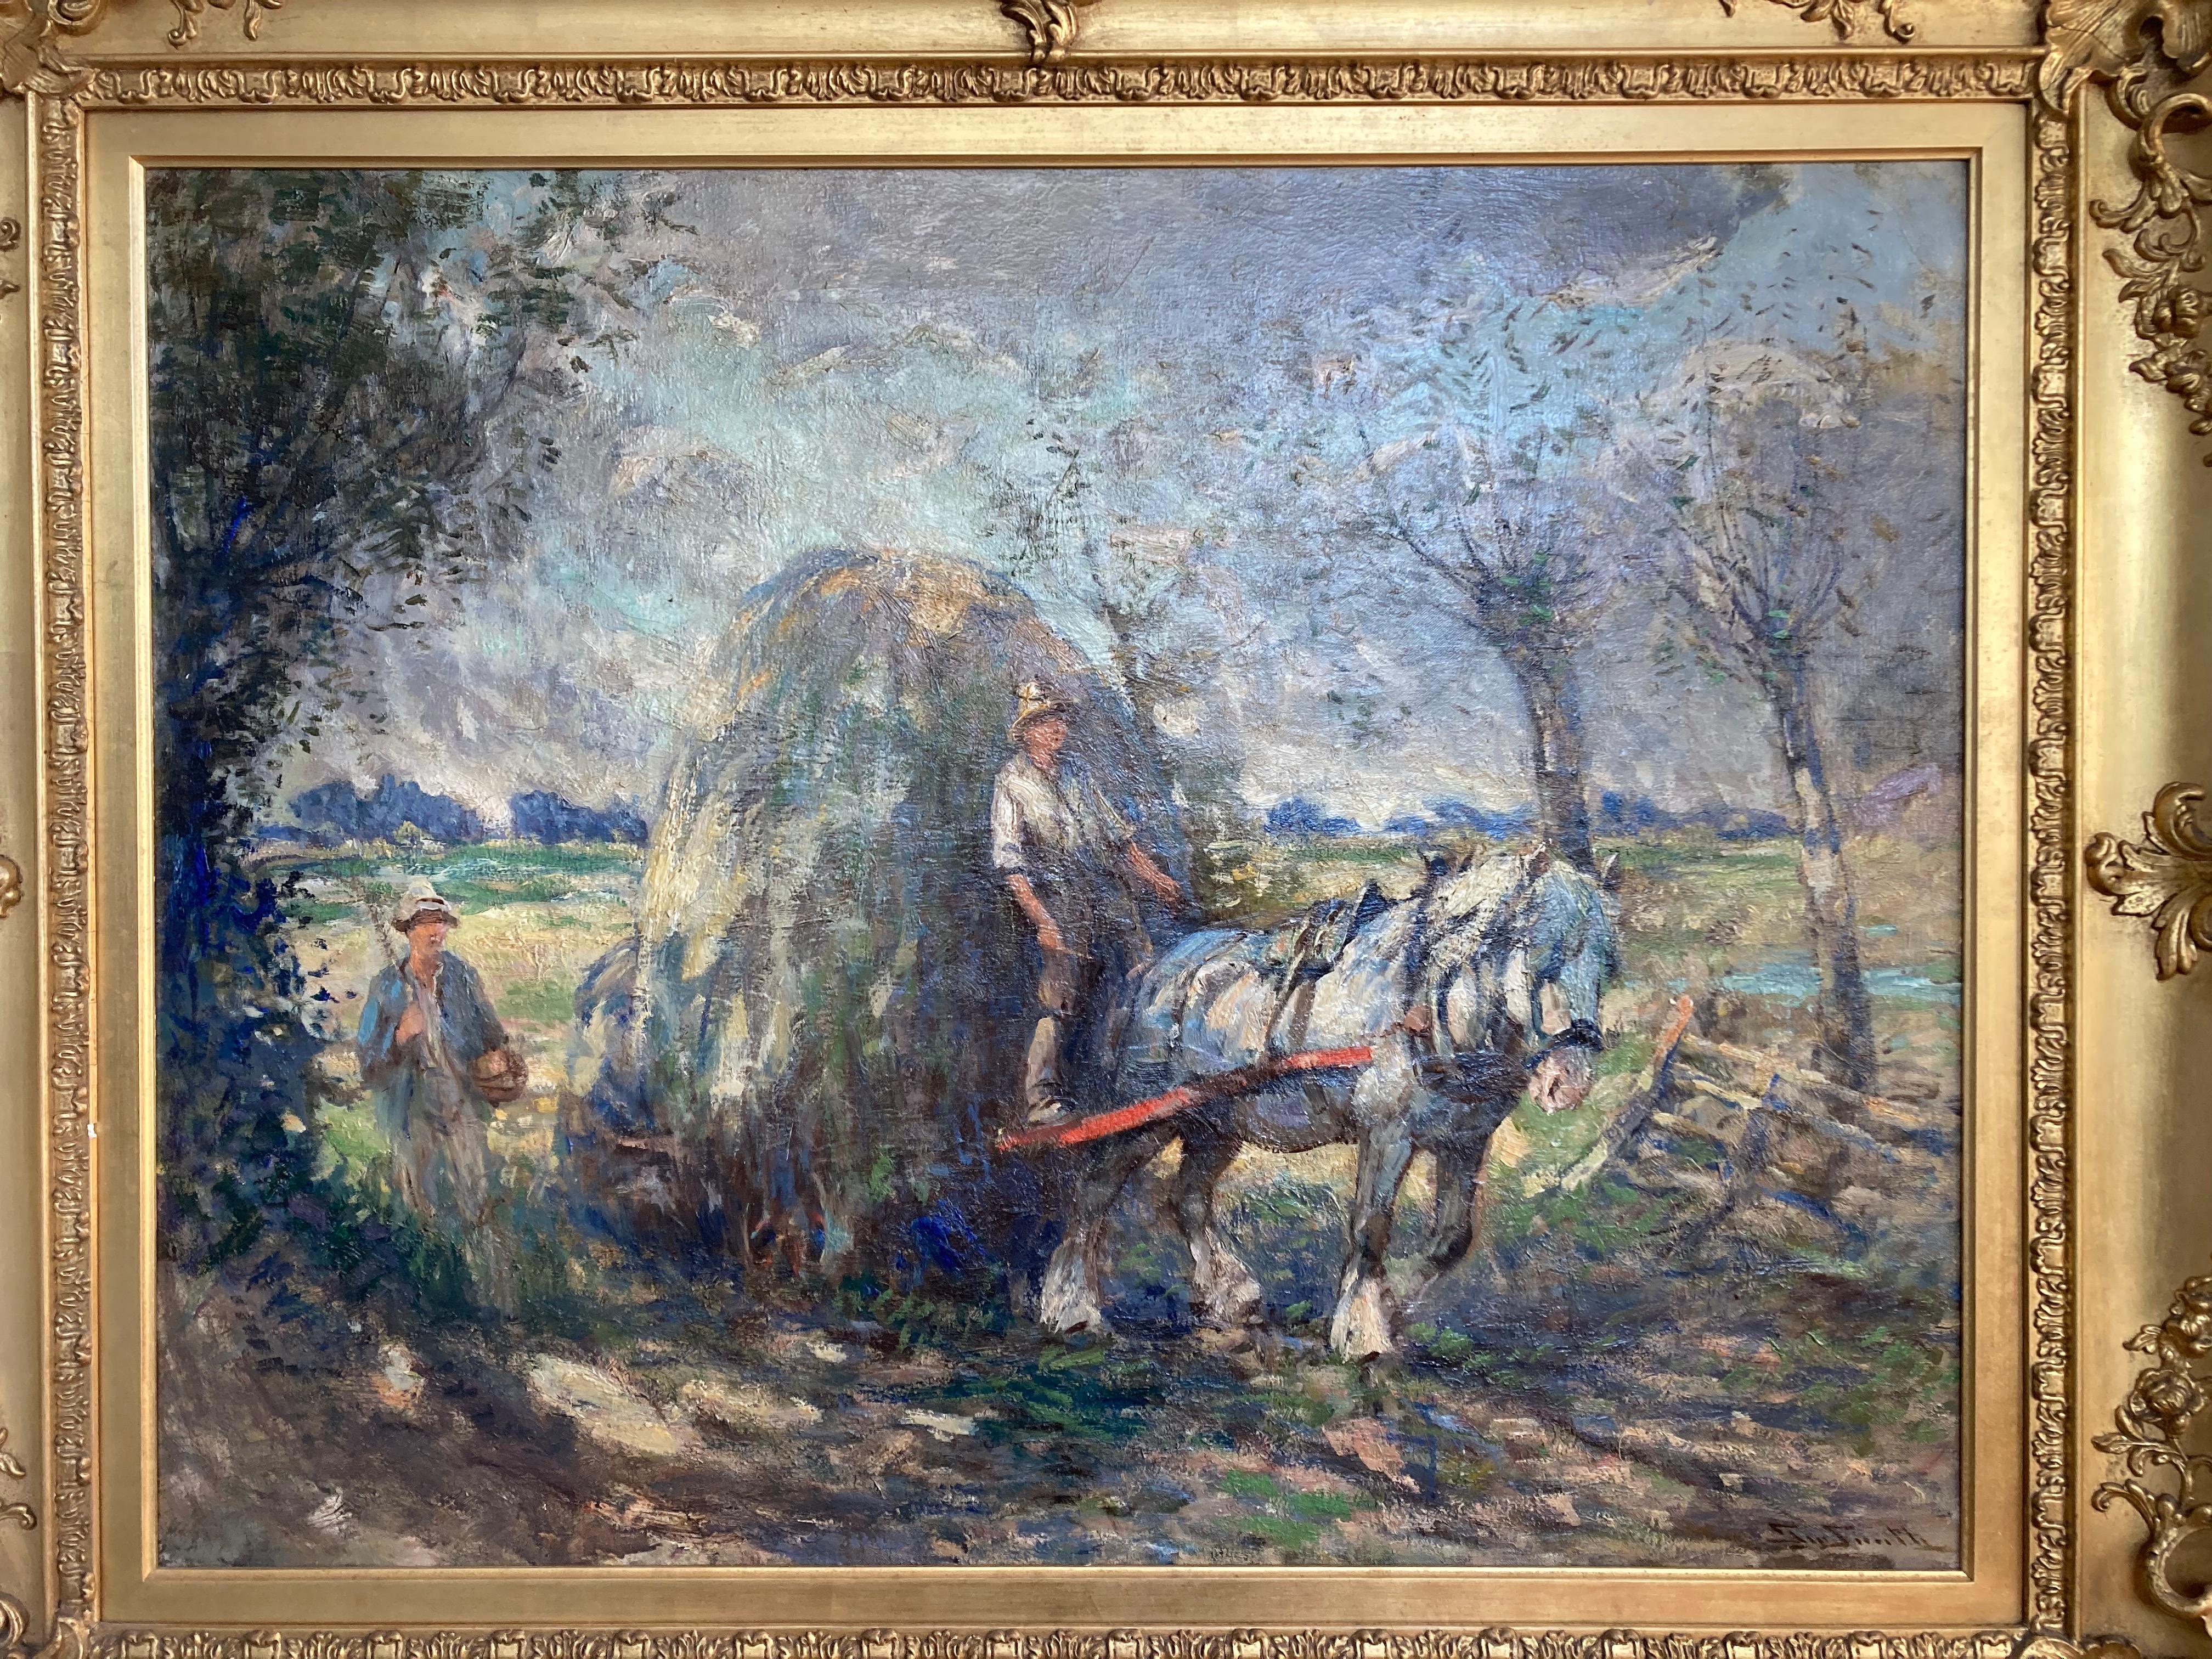 A magnificent rural scene by this master of Scottish Impressionism

George Smith (1870-1934)
Harvest time
Signed
Oil on canvas
28 x 36 inches unframed
40 x 48 inches including the frame

George Smith was born in 1870 in Mid-Calder in Mid-Lothian. He